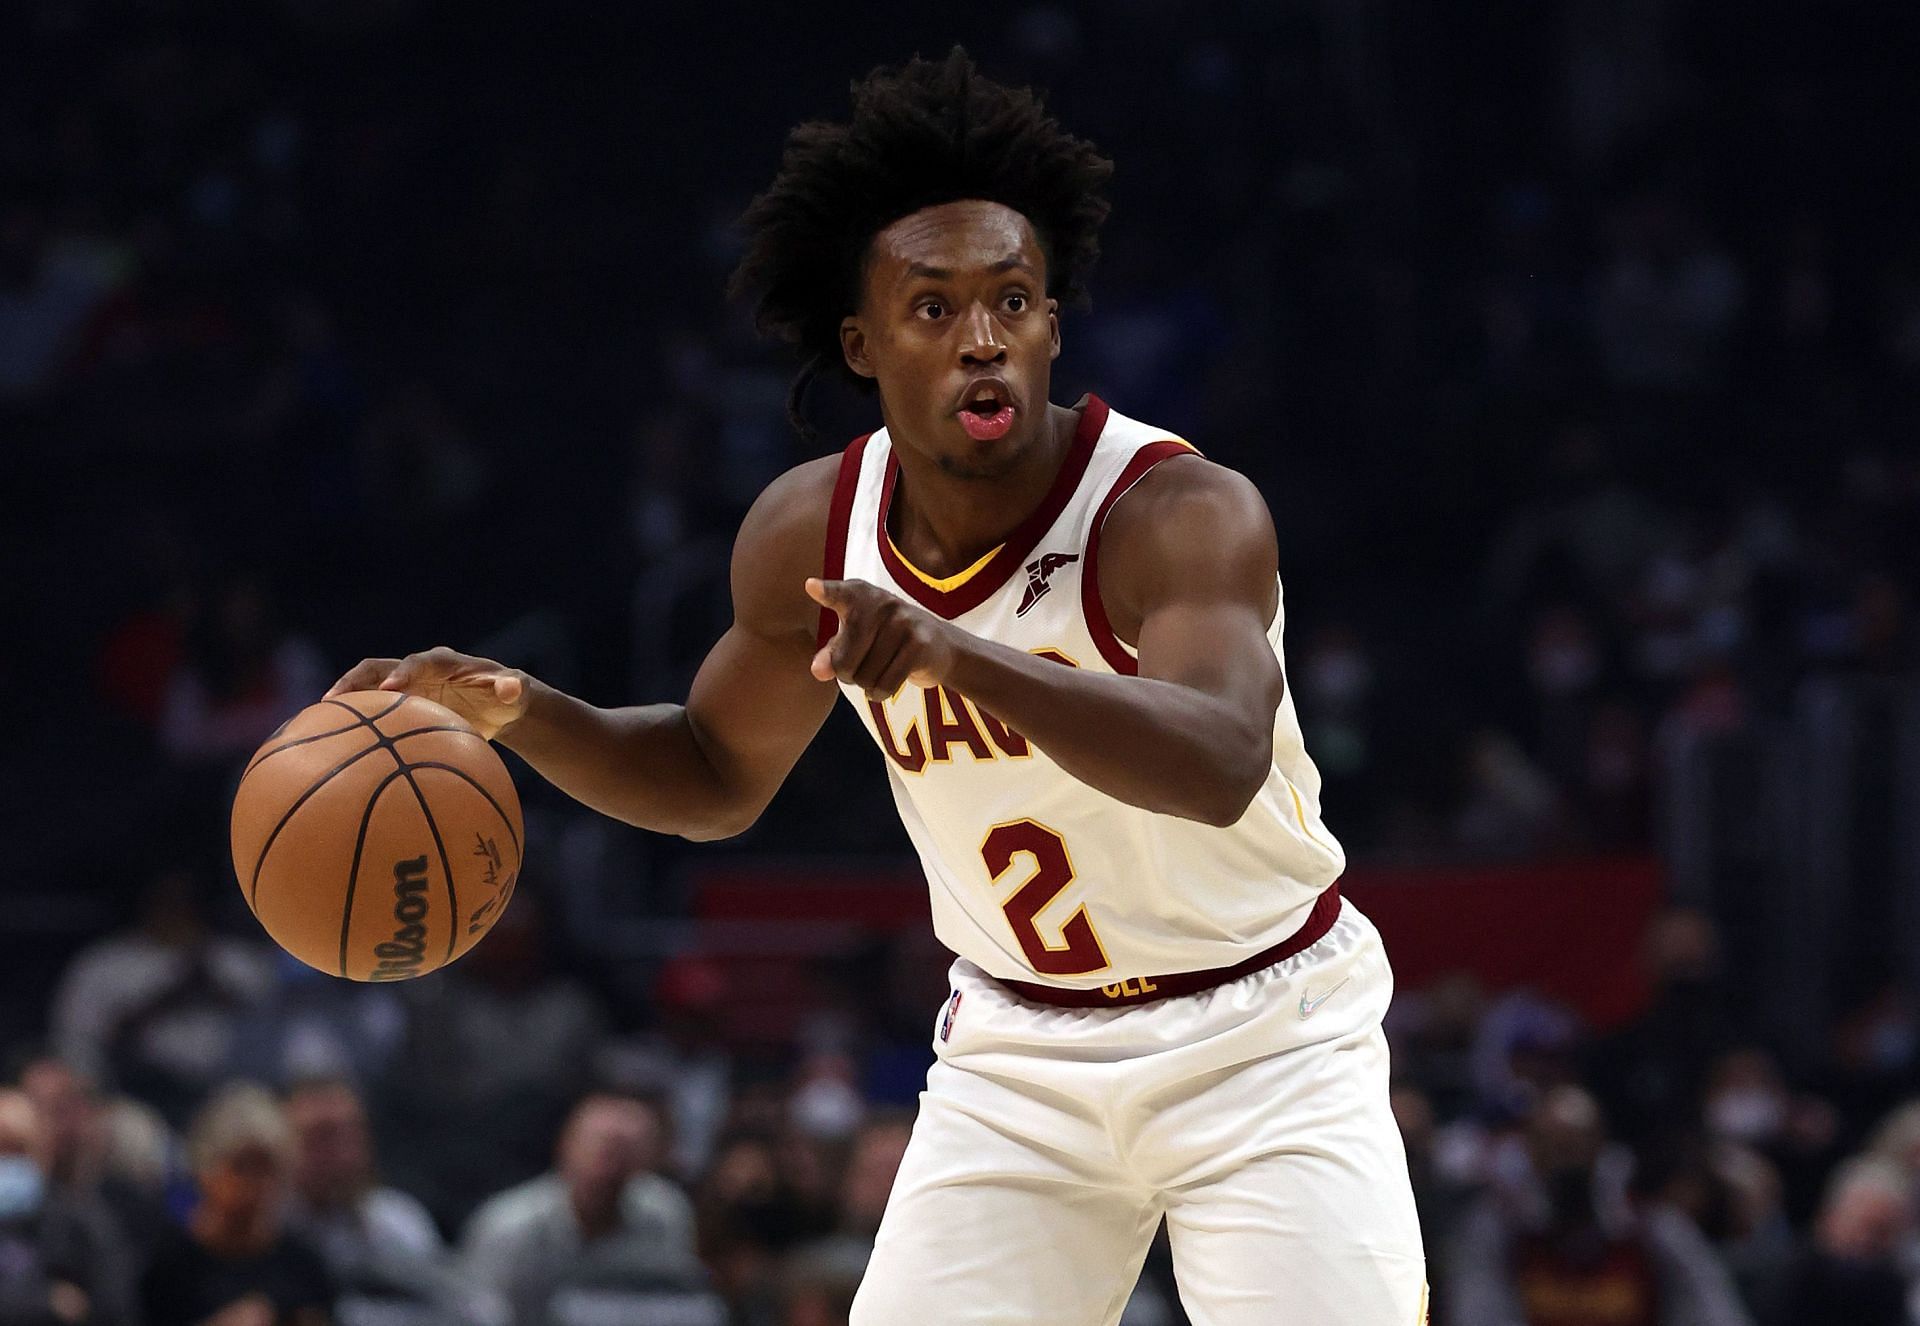 Collin Sexton was the 8th overall pick in the 2018 NBA draft.